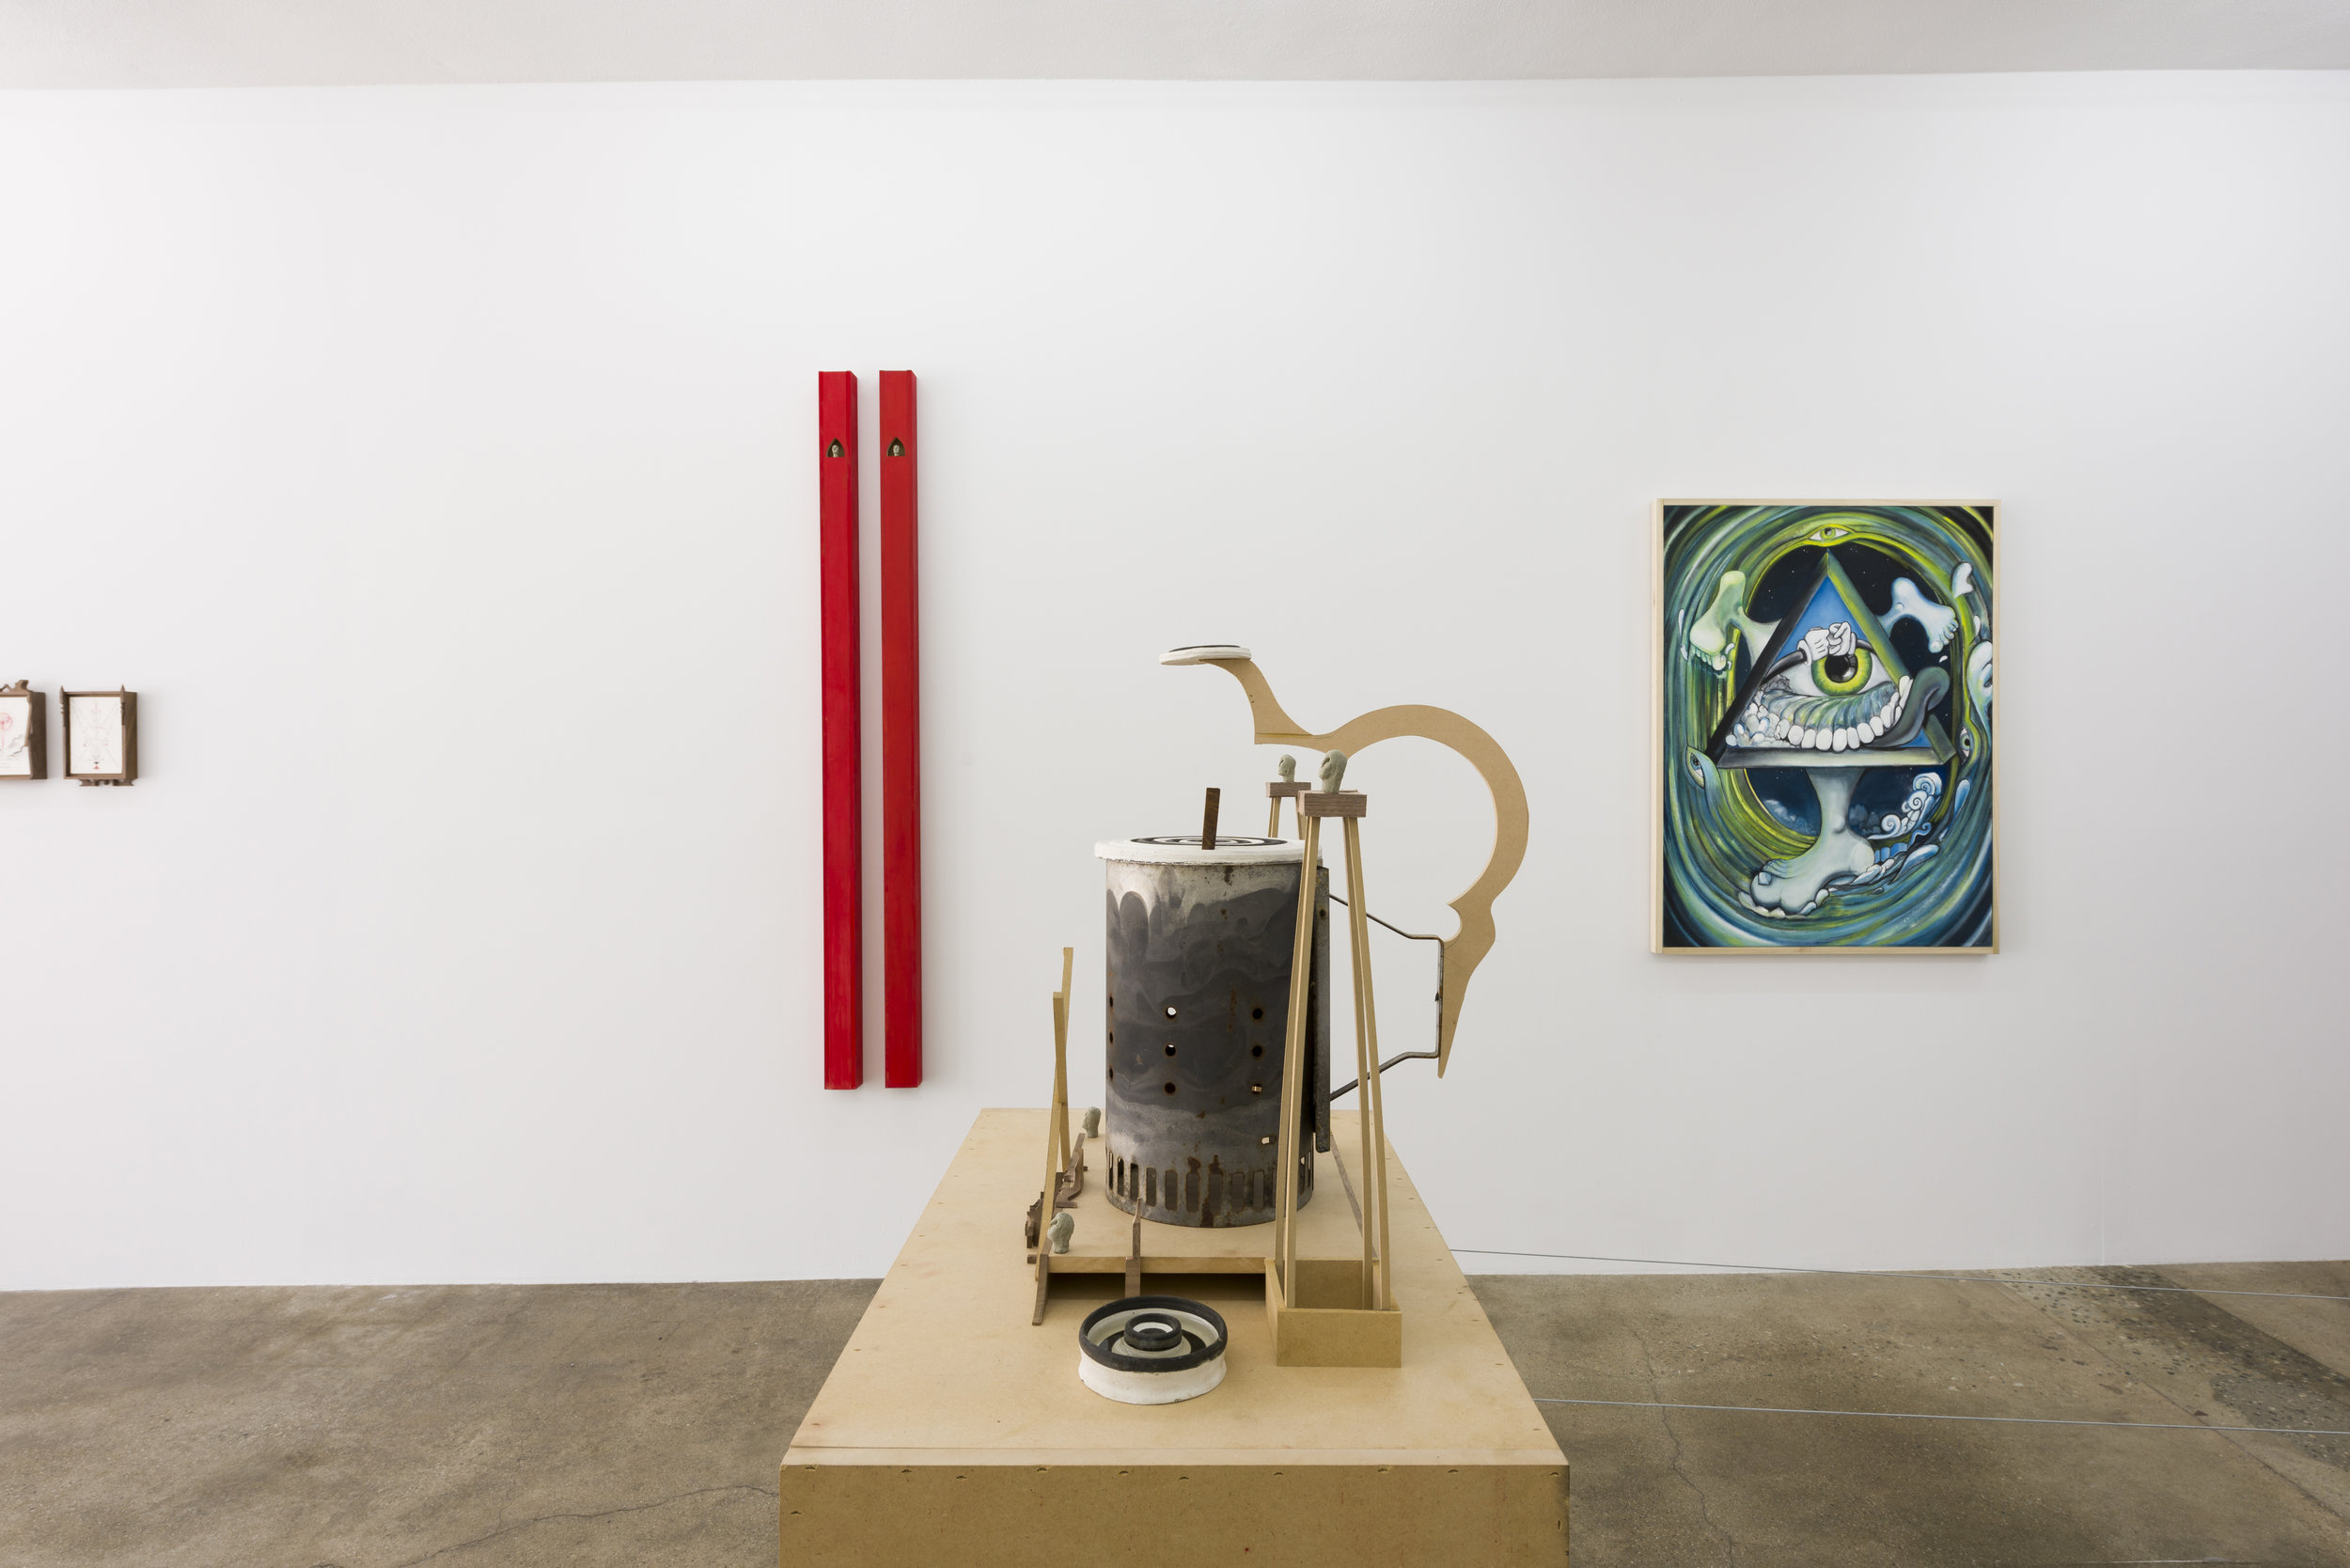  Installation view of  The Institute for Chaotic Love &amp; Healing  R. Lord, Harry Gould Harvey IV, DJ Richard  May 19 - June 30, 2019  Photo by Ruben Diaz   Link to press release.  